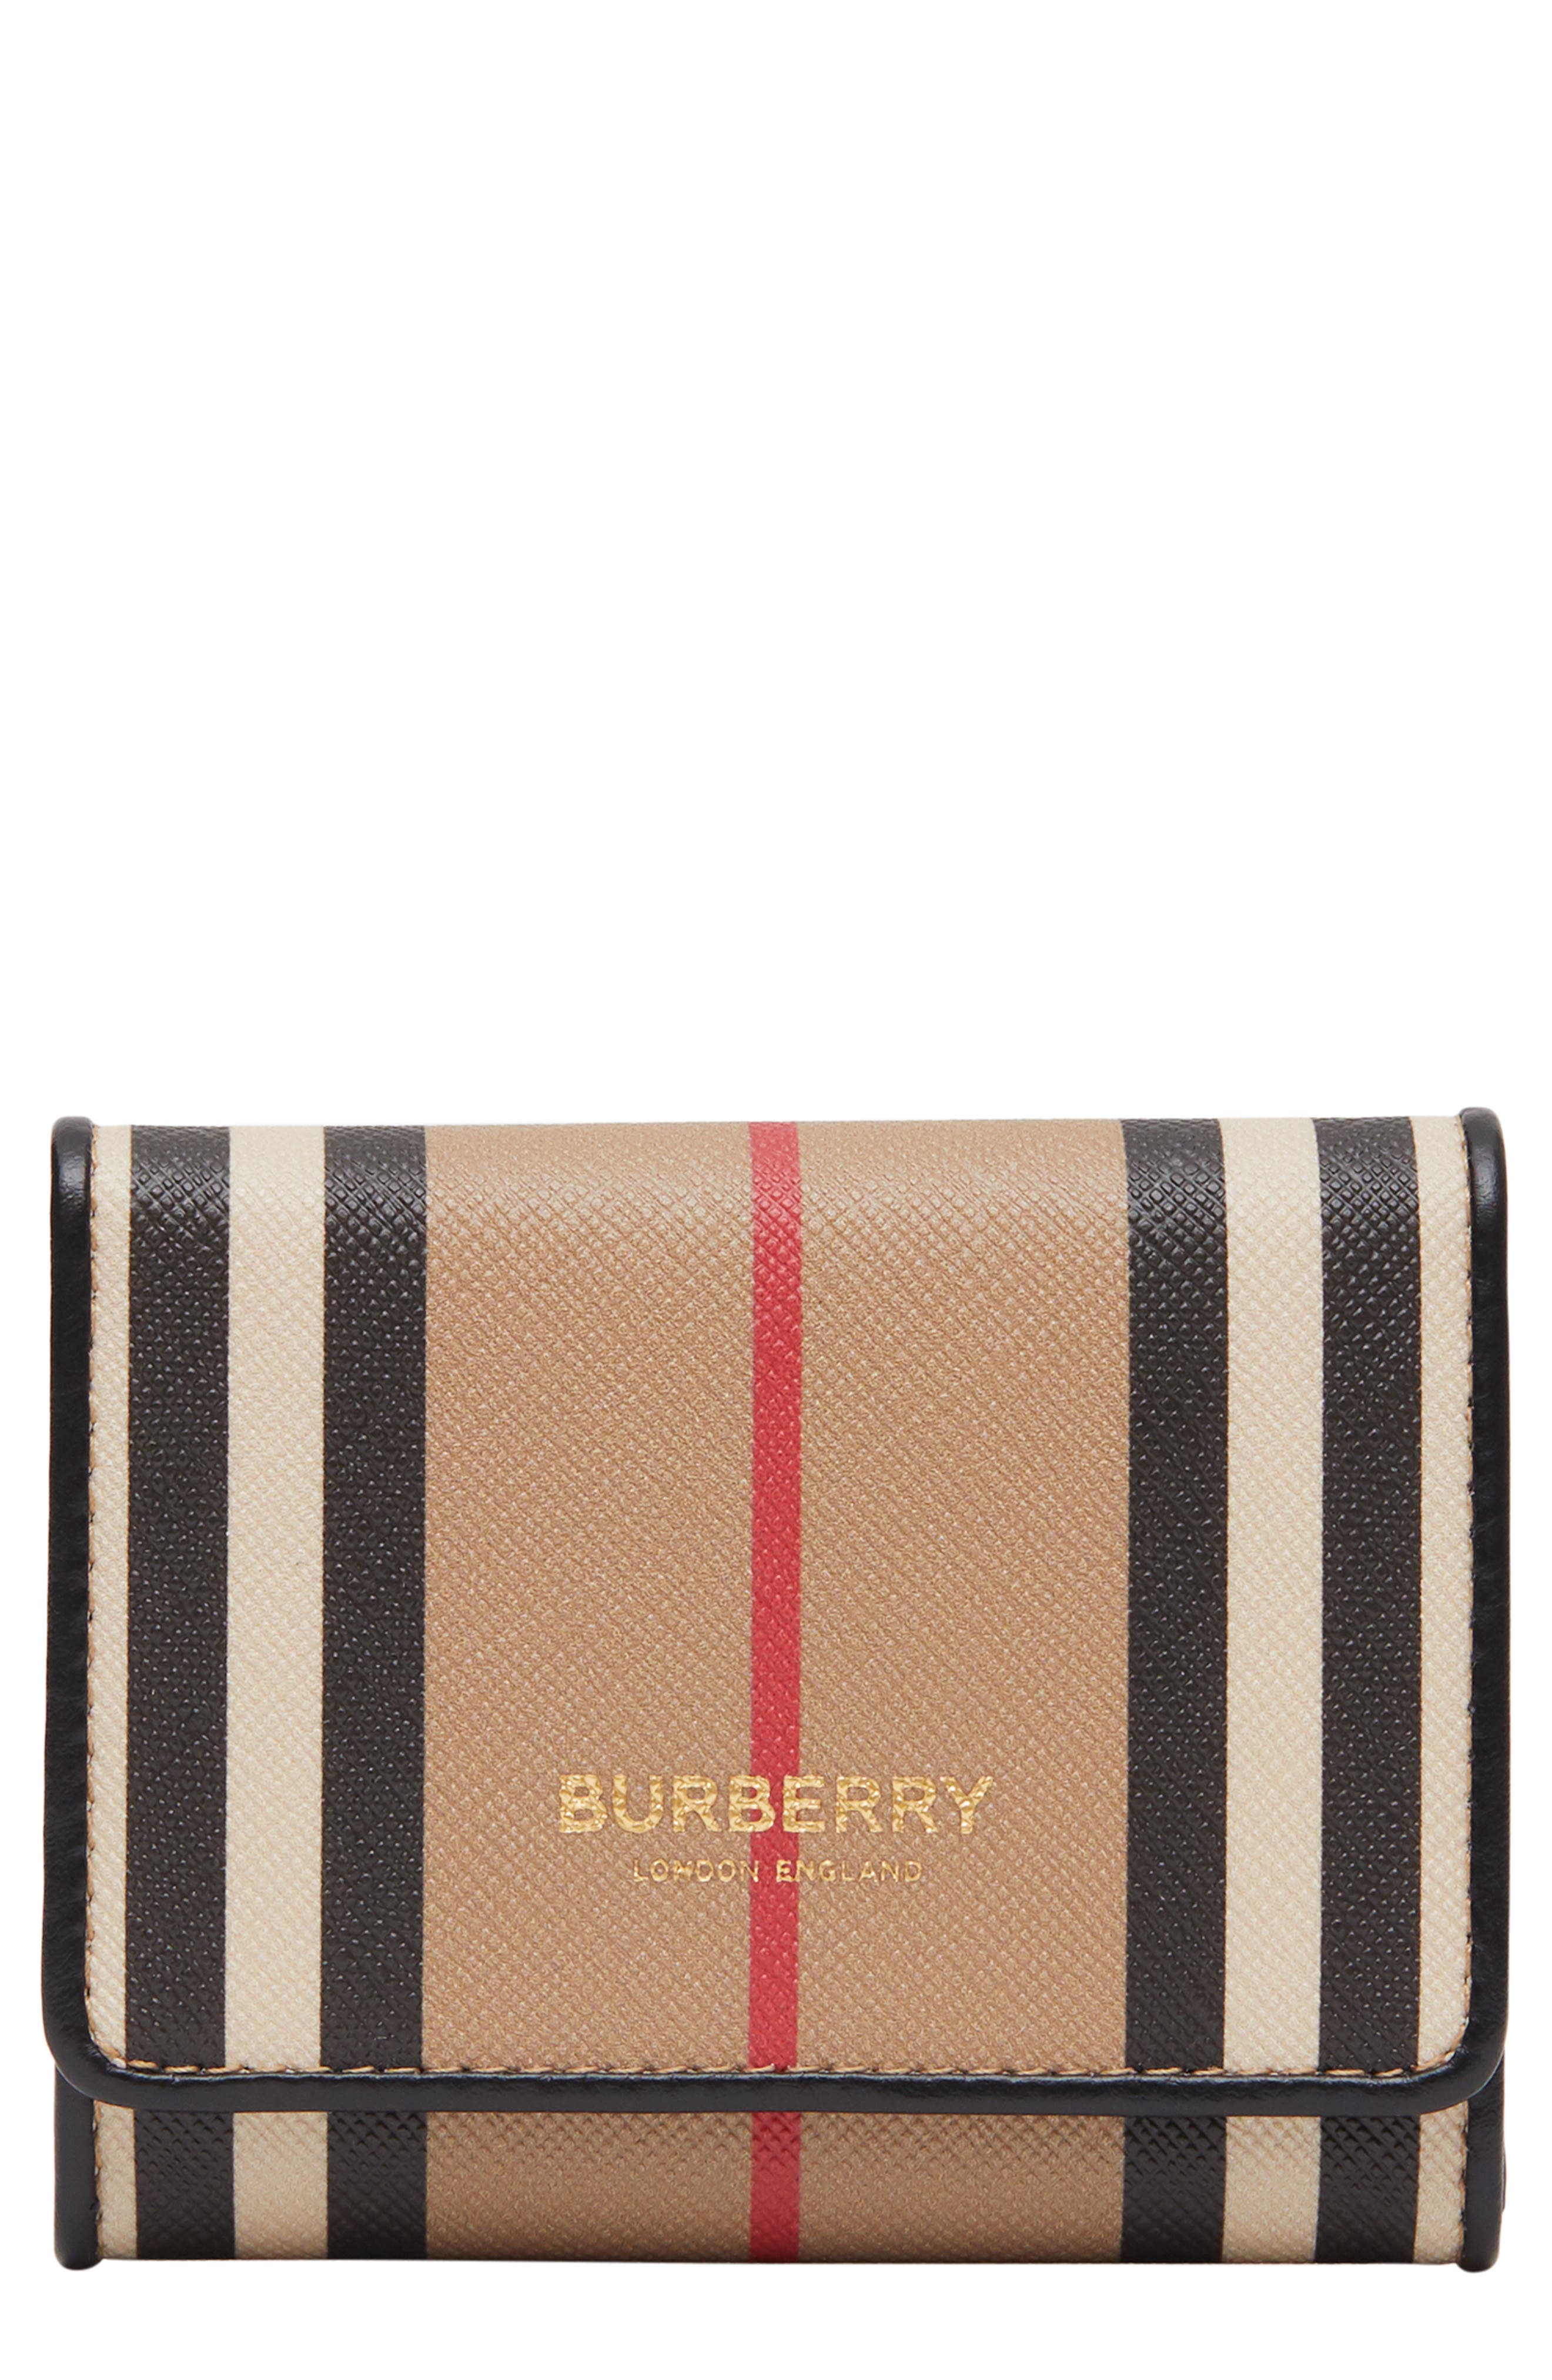 Burberry Black Leather Sidney Trifold Wallet Burberry